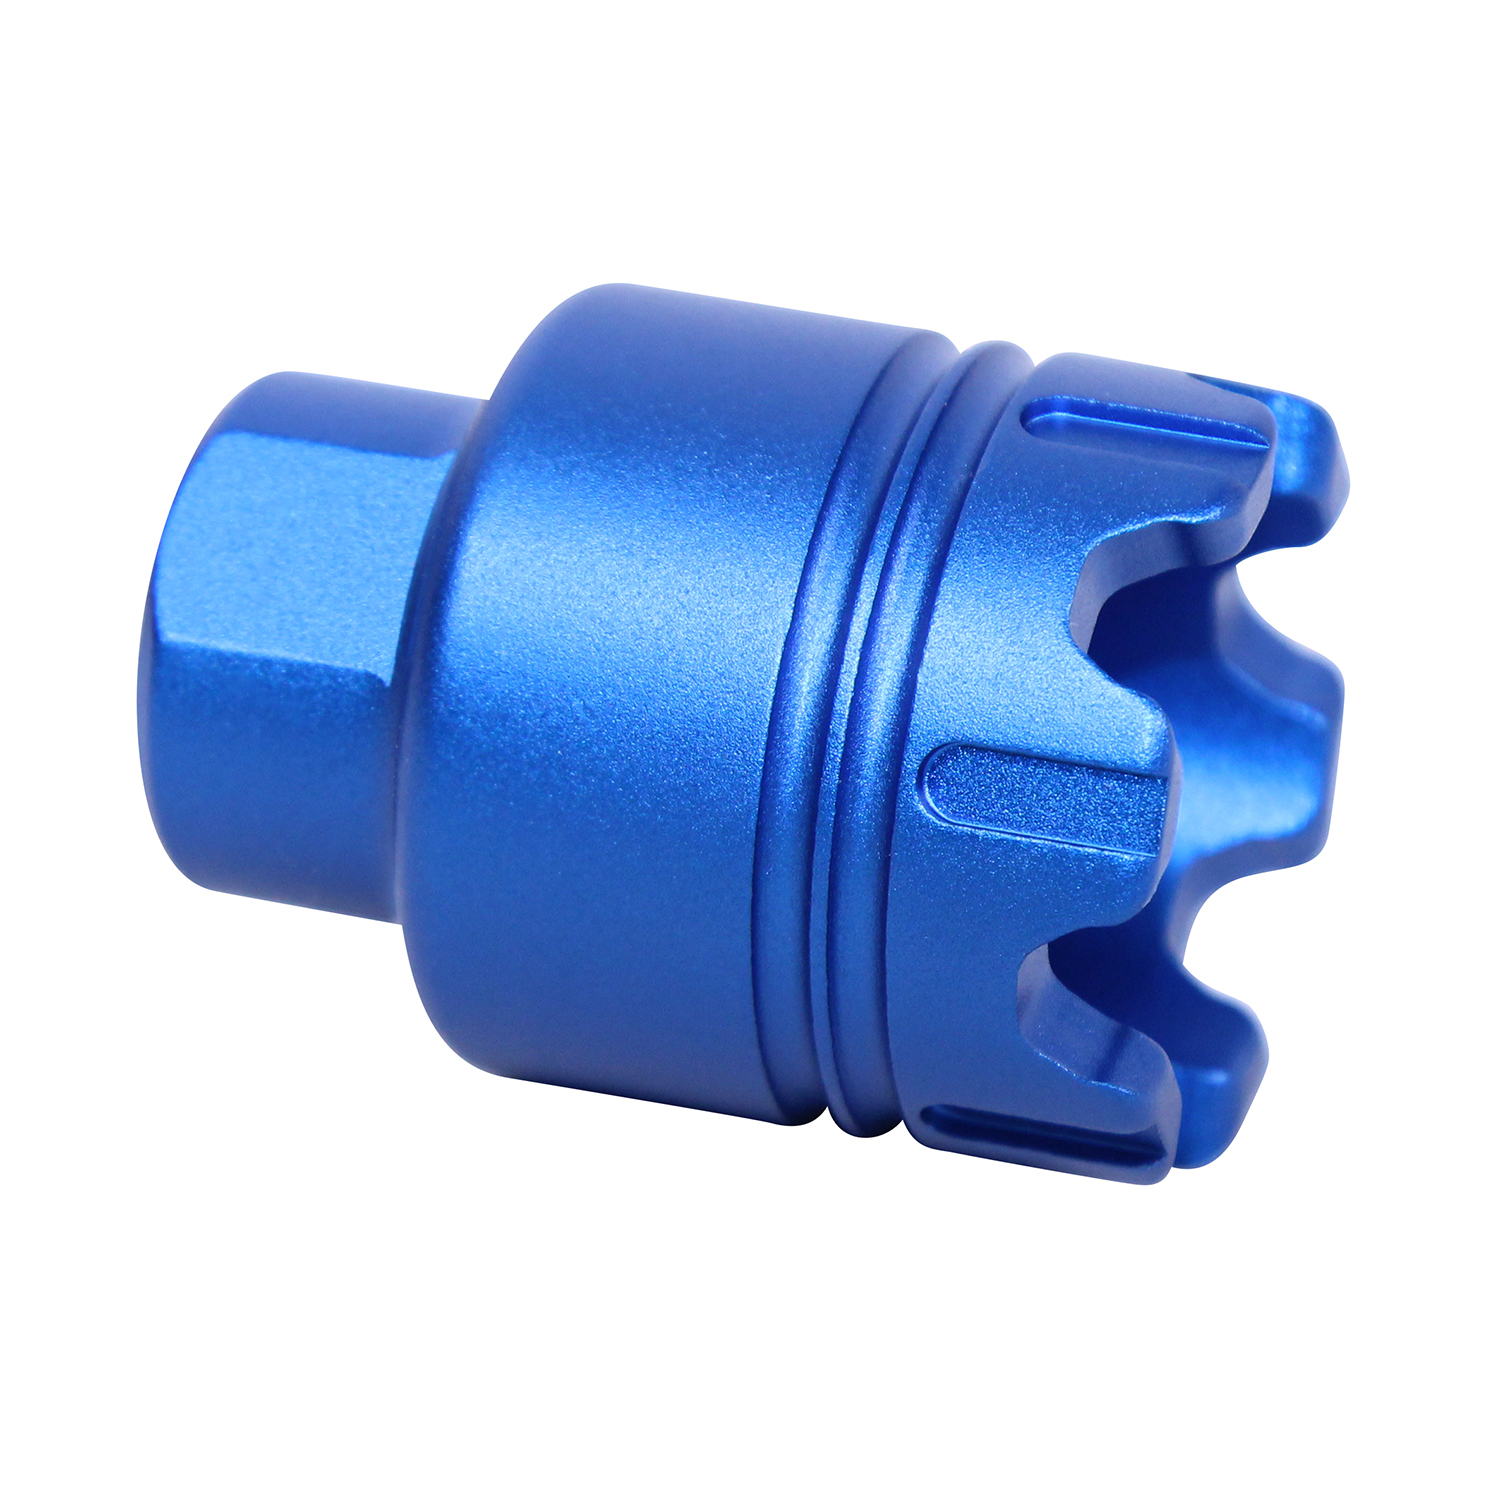 AR-15 Mini 'Trident' Flash Can With Glass Breaker (9mm) (Anodized Blue)